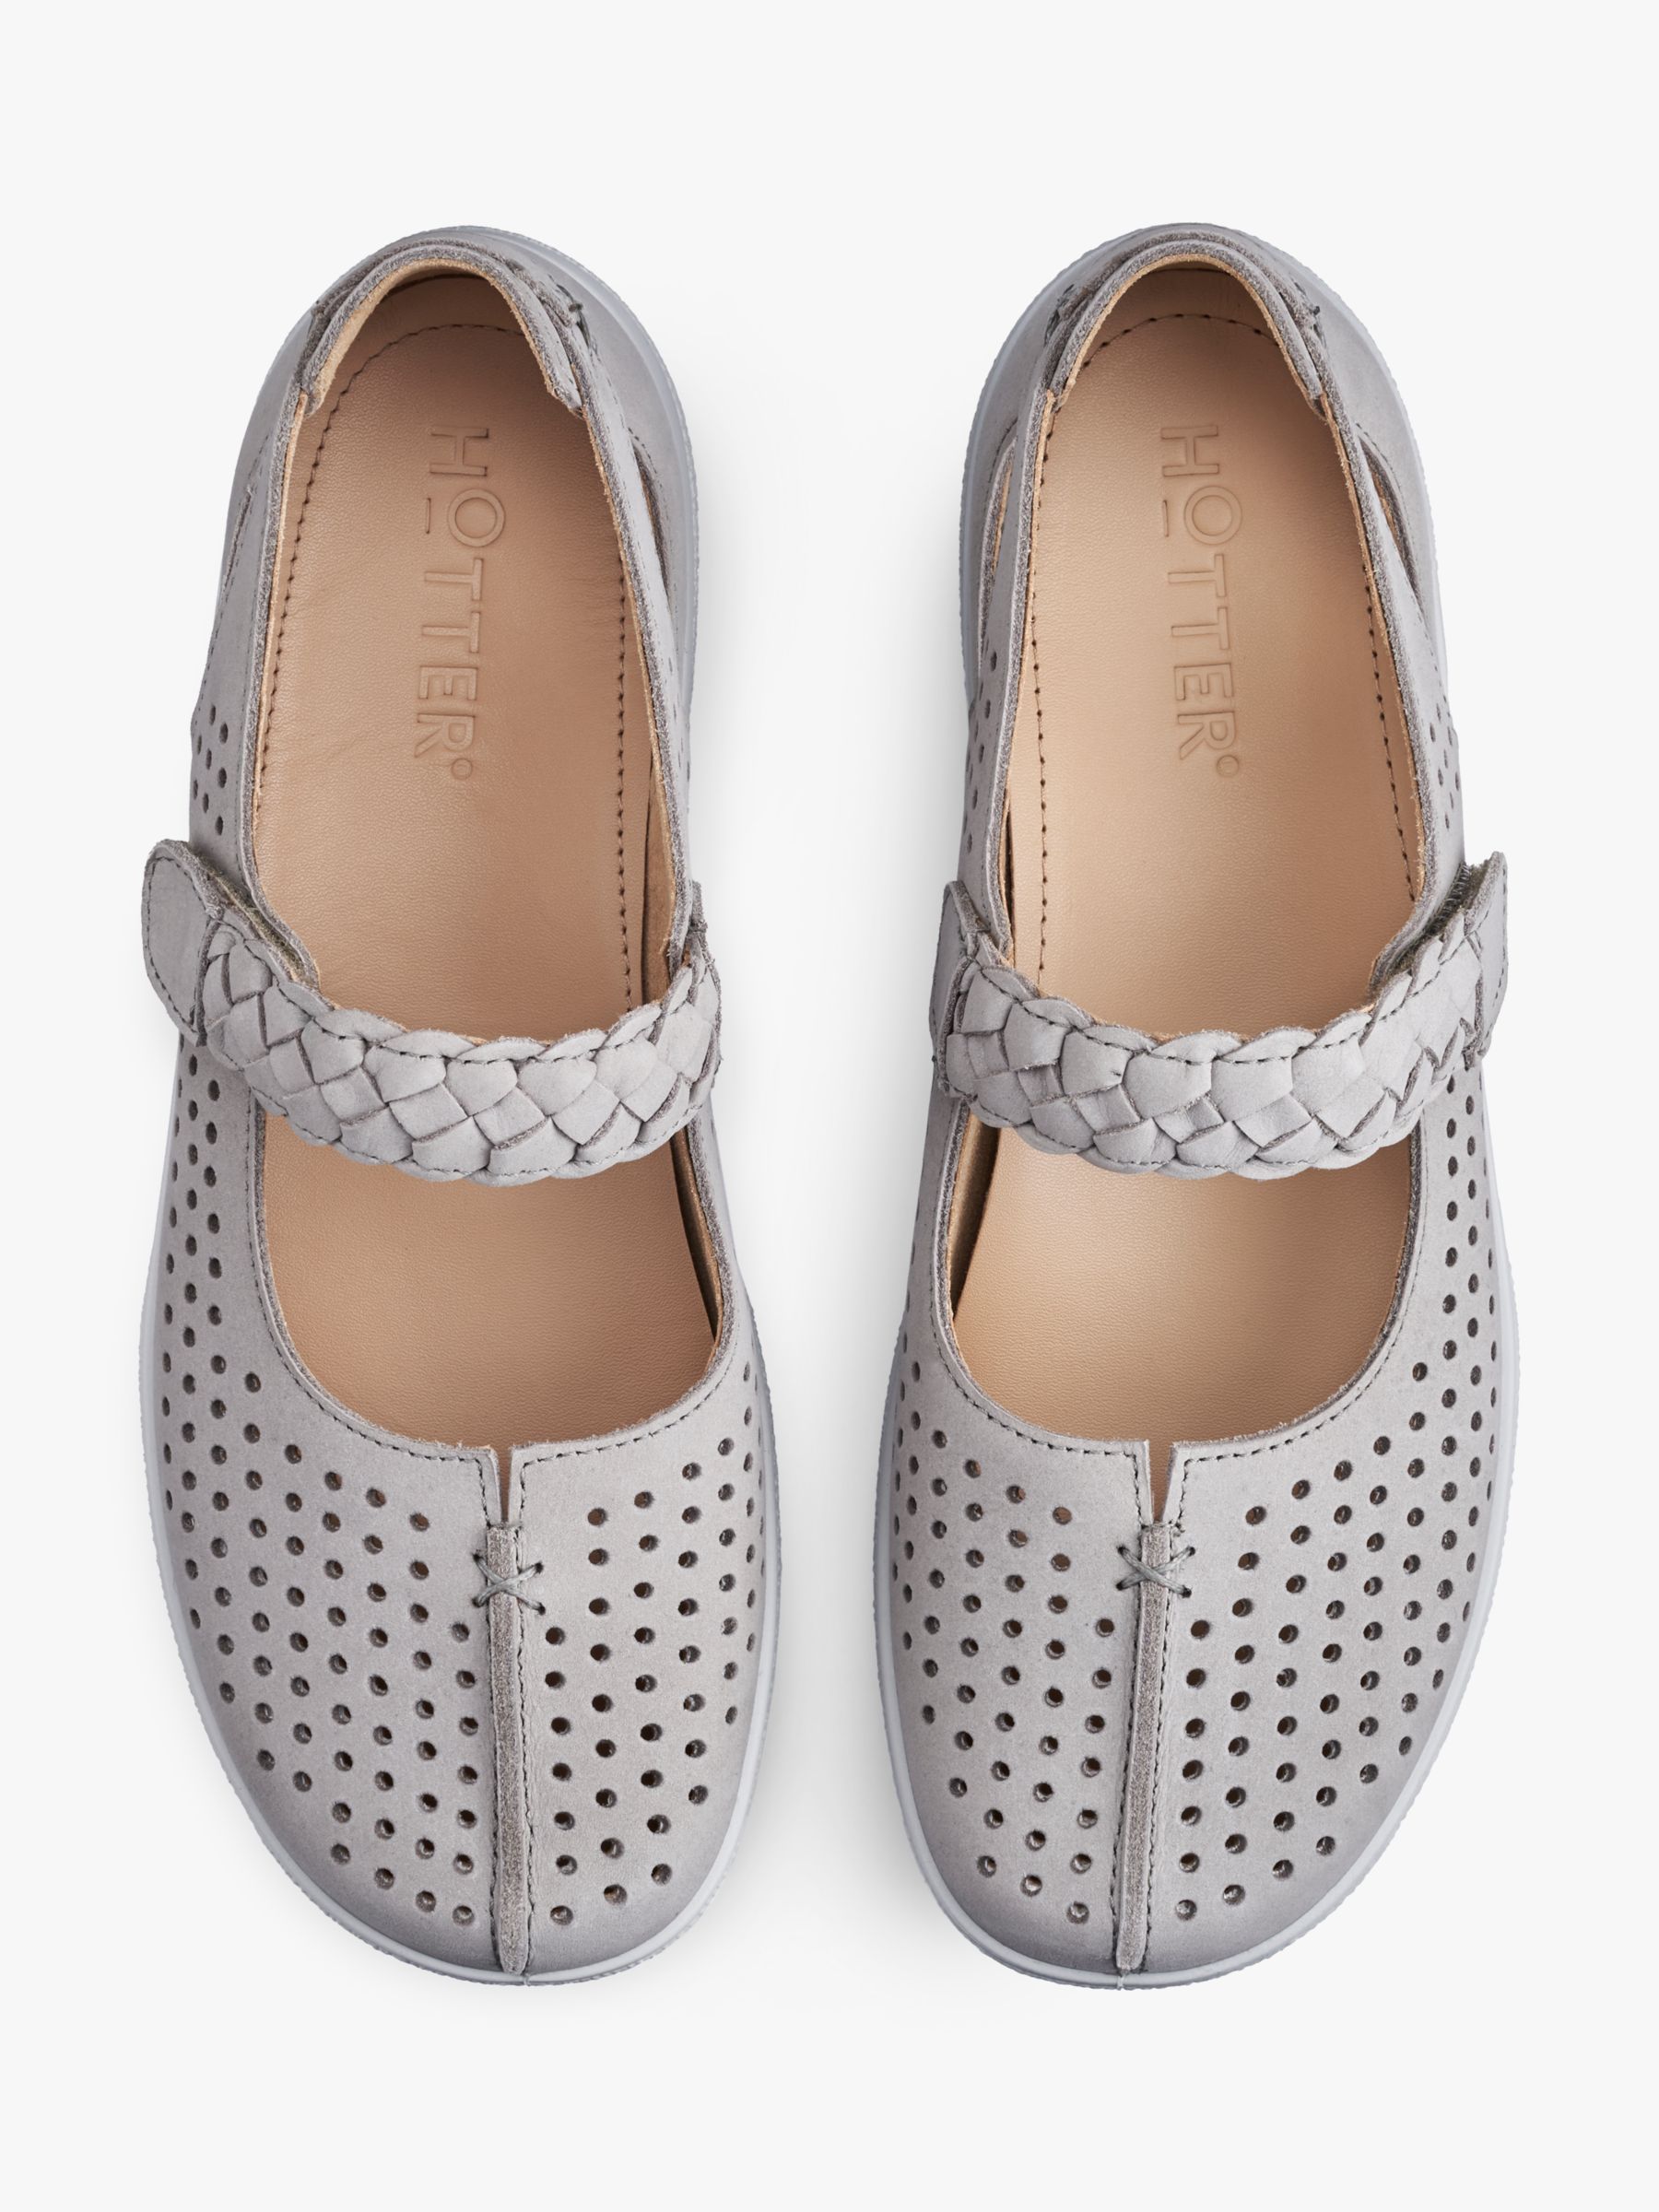 Buy Hotter Quake II Extra Wide Fit Perforated Nubuck Mary Jane Shoes, Flint Grey Online at johnlewis.com